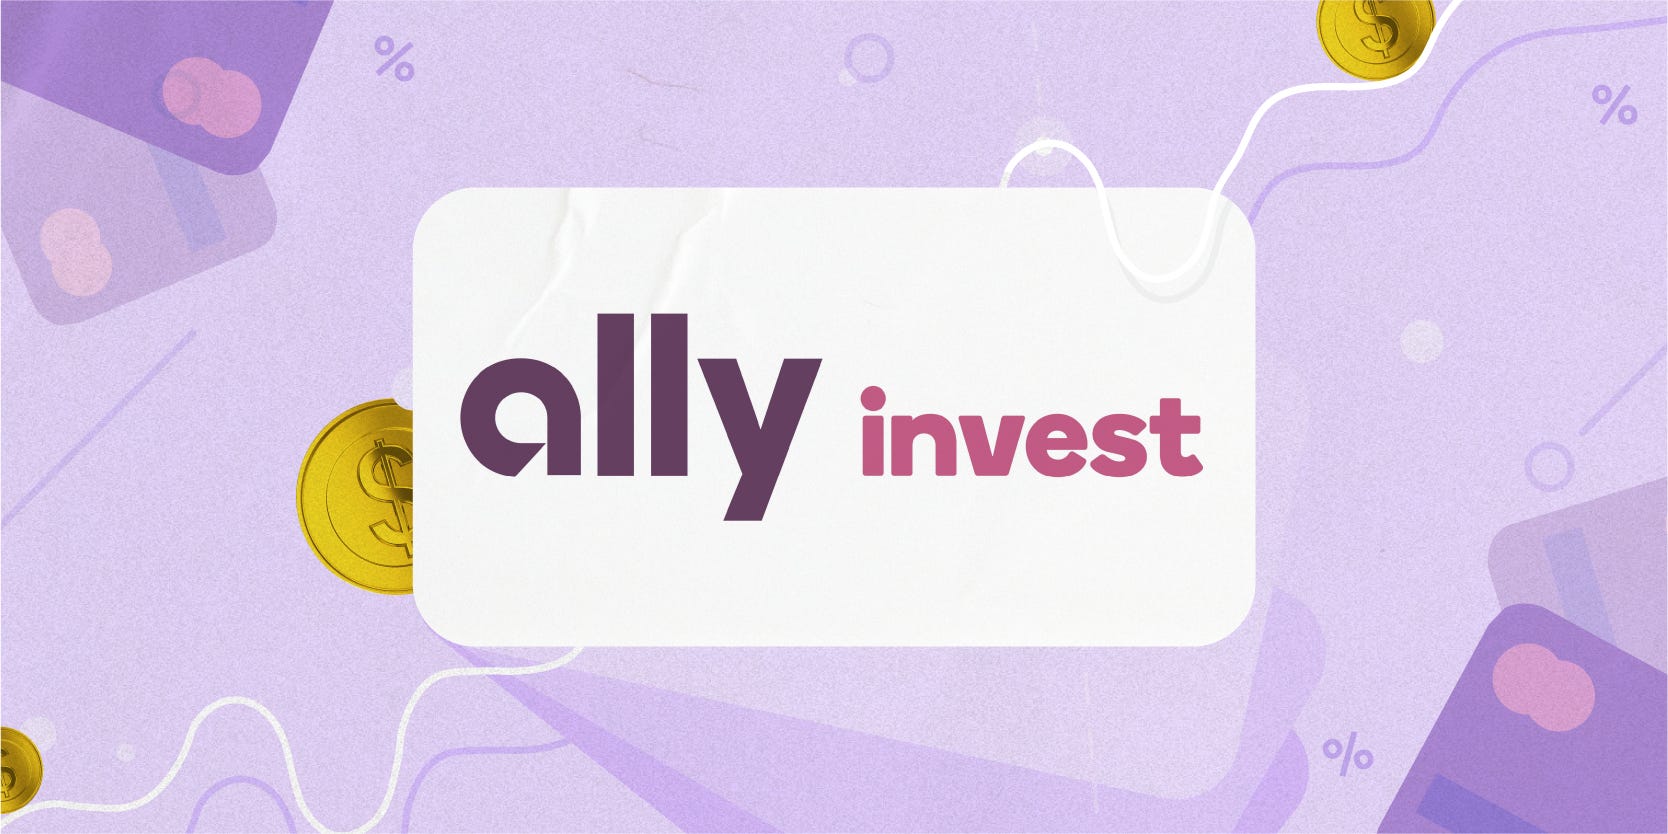 Ally Invest logo on purple background.